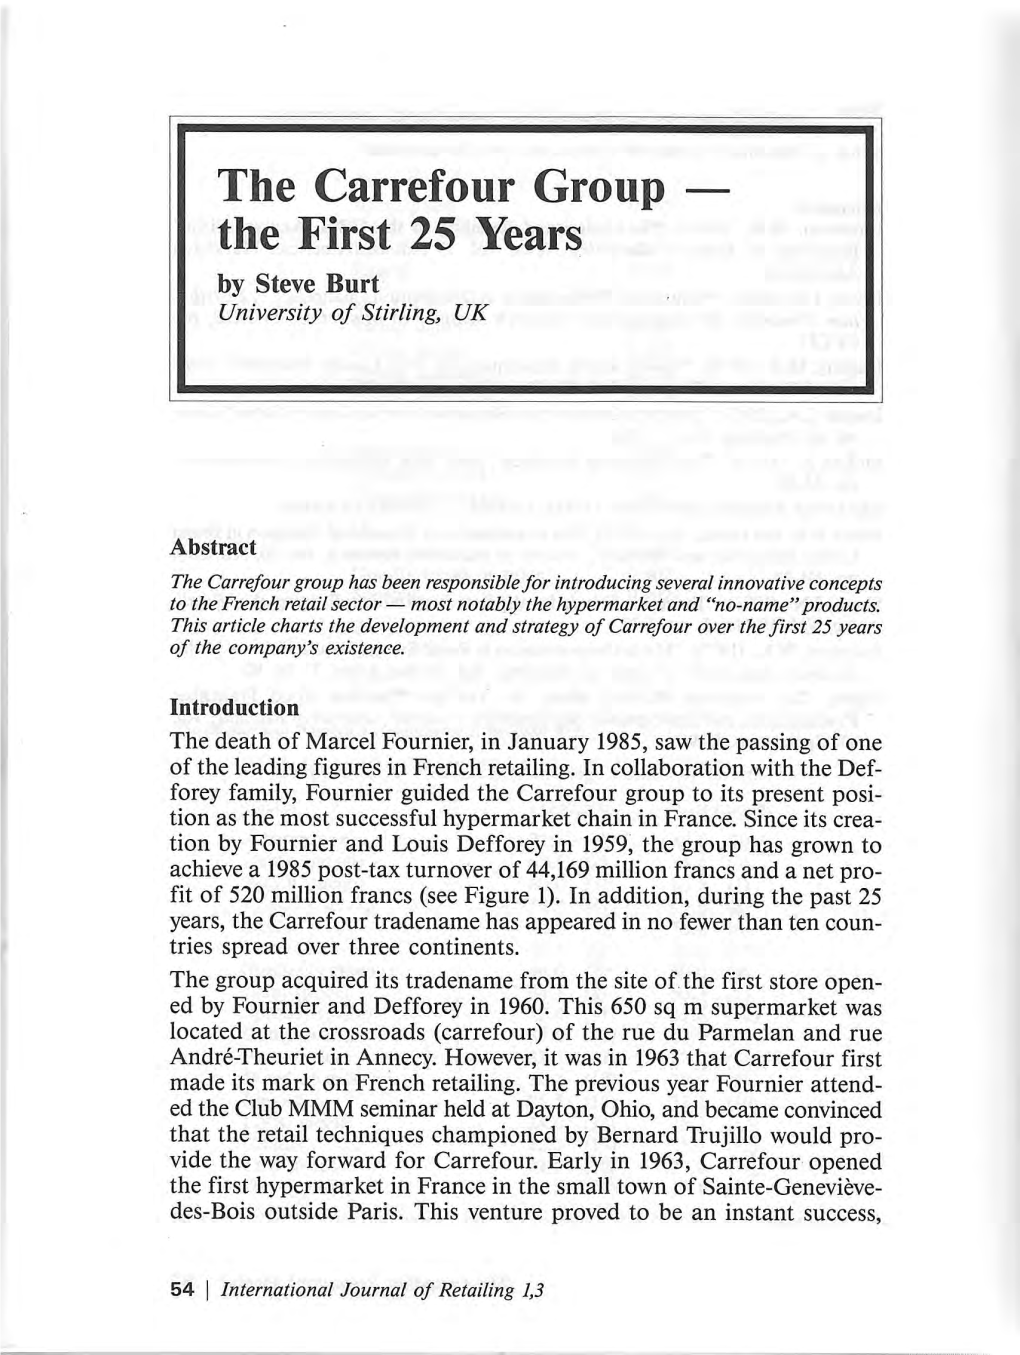 The Carrefour Group the First 25 Years